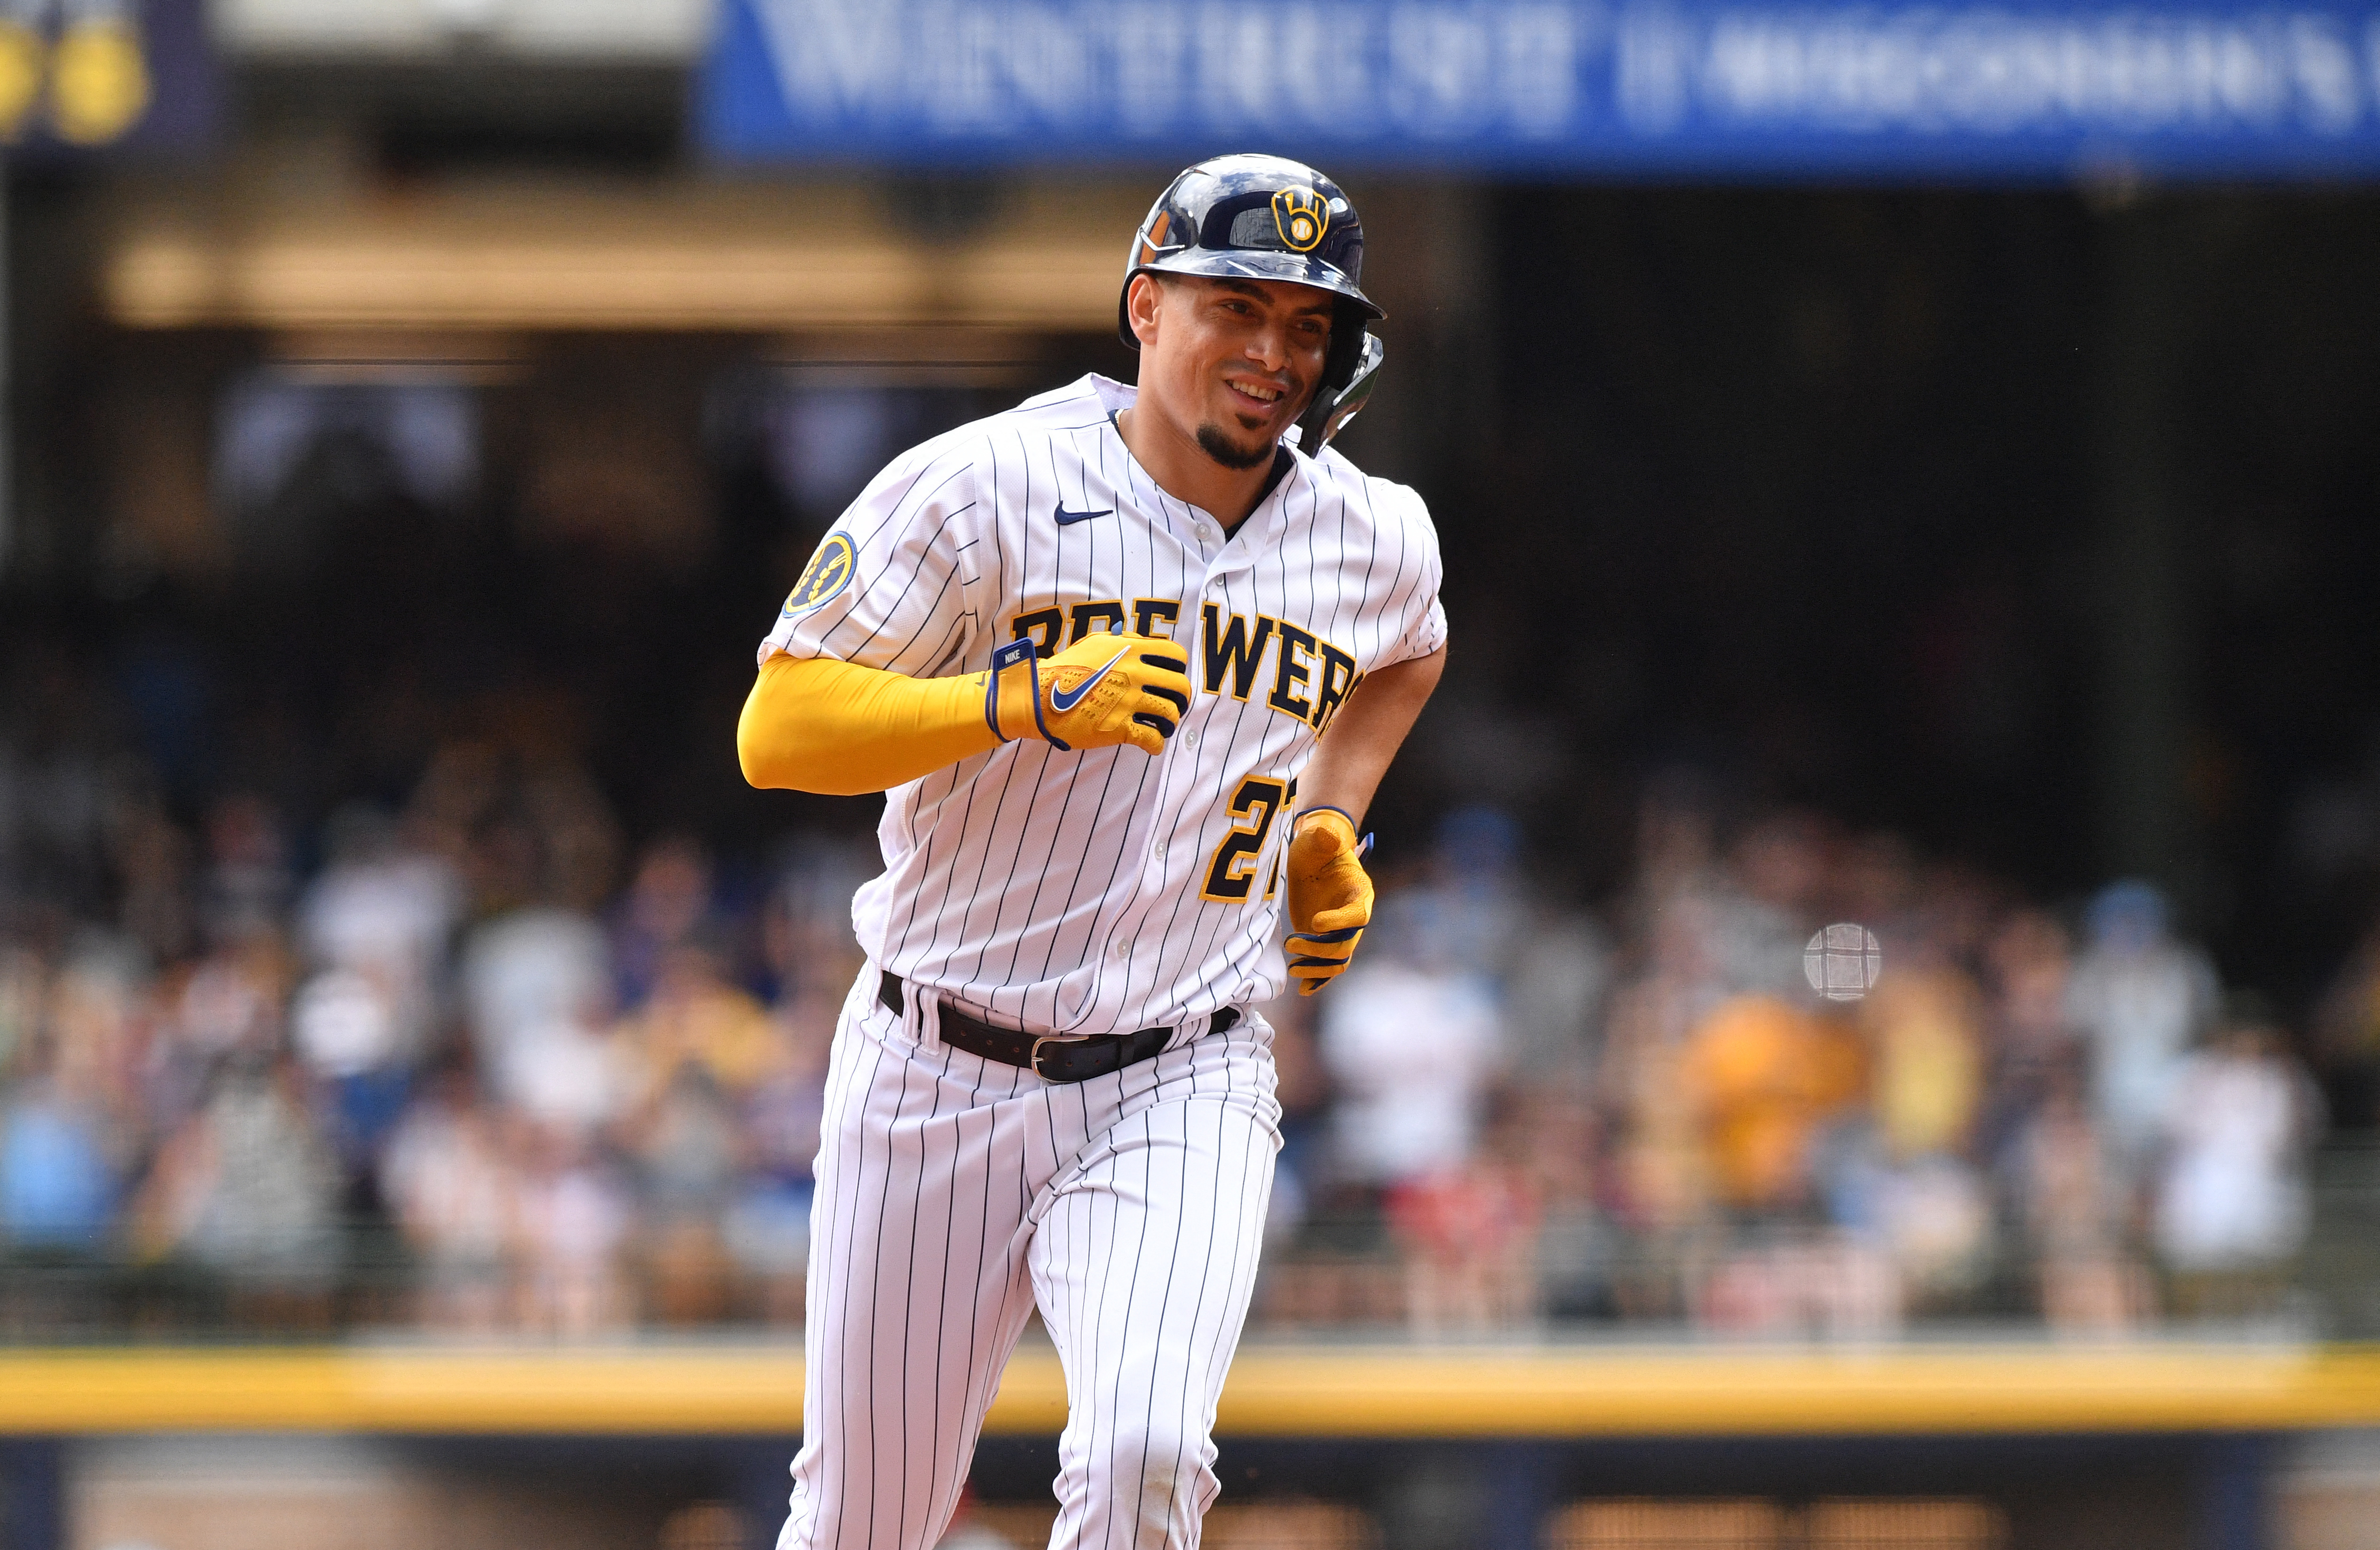 Cruz HR, drives in lead run, Pirates top Reds on opening day